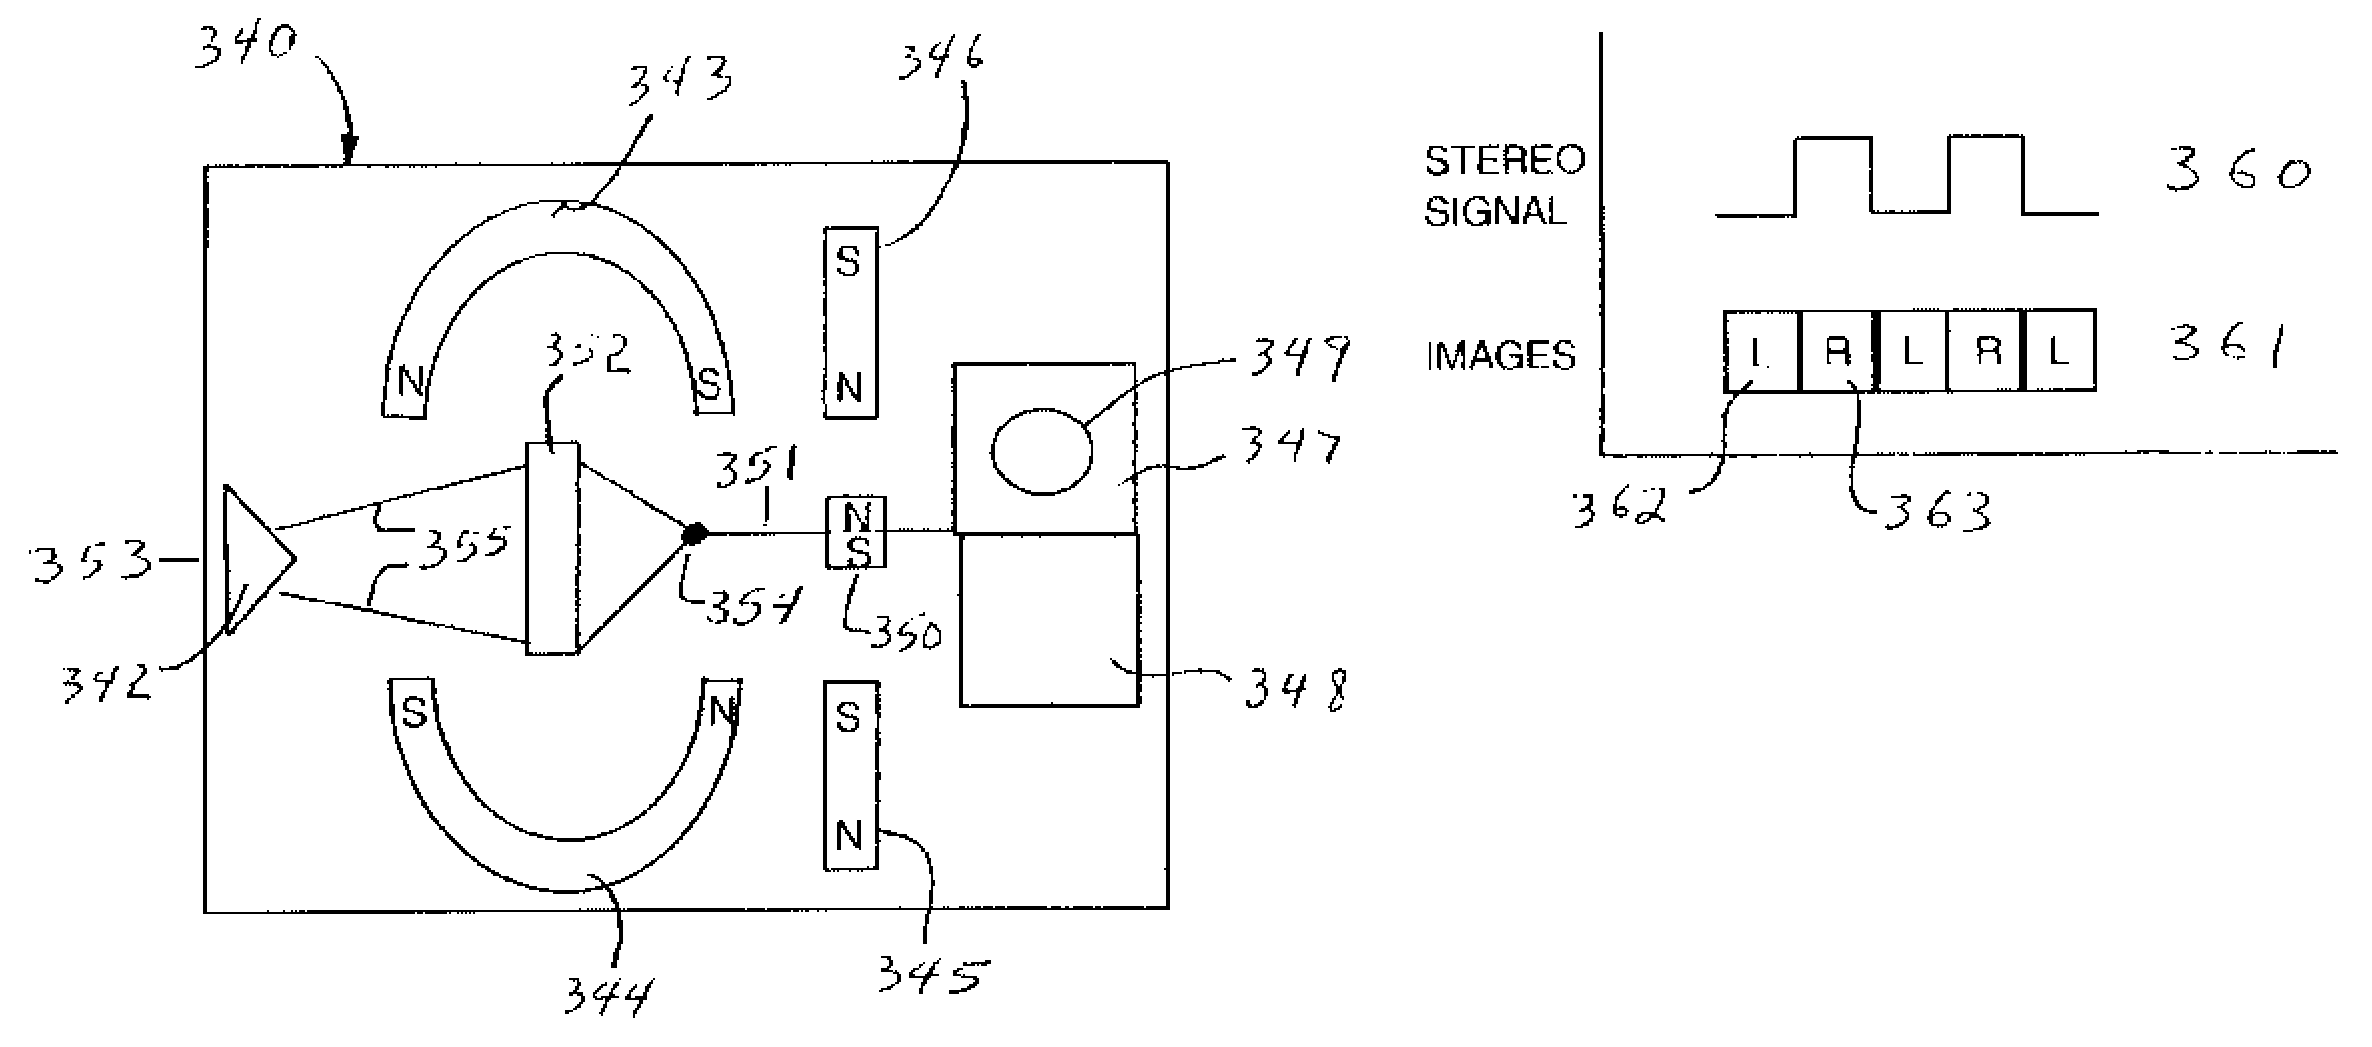 Stereographic Imaging System Using Open Loop Magnetomechanically Resonant Polarizing Filter Actuator